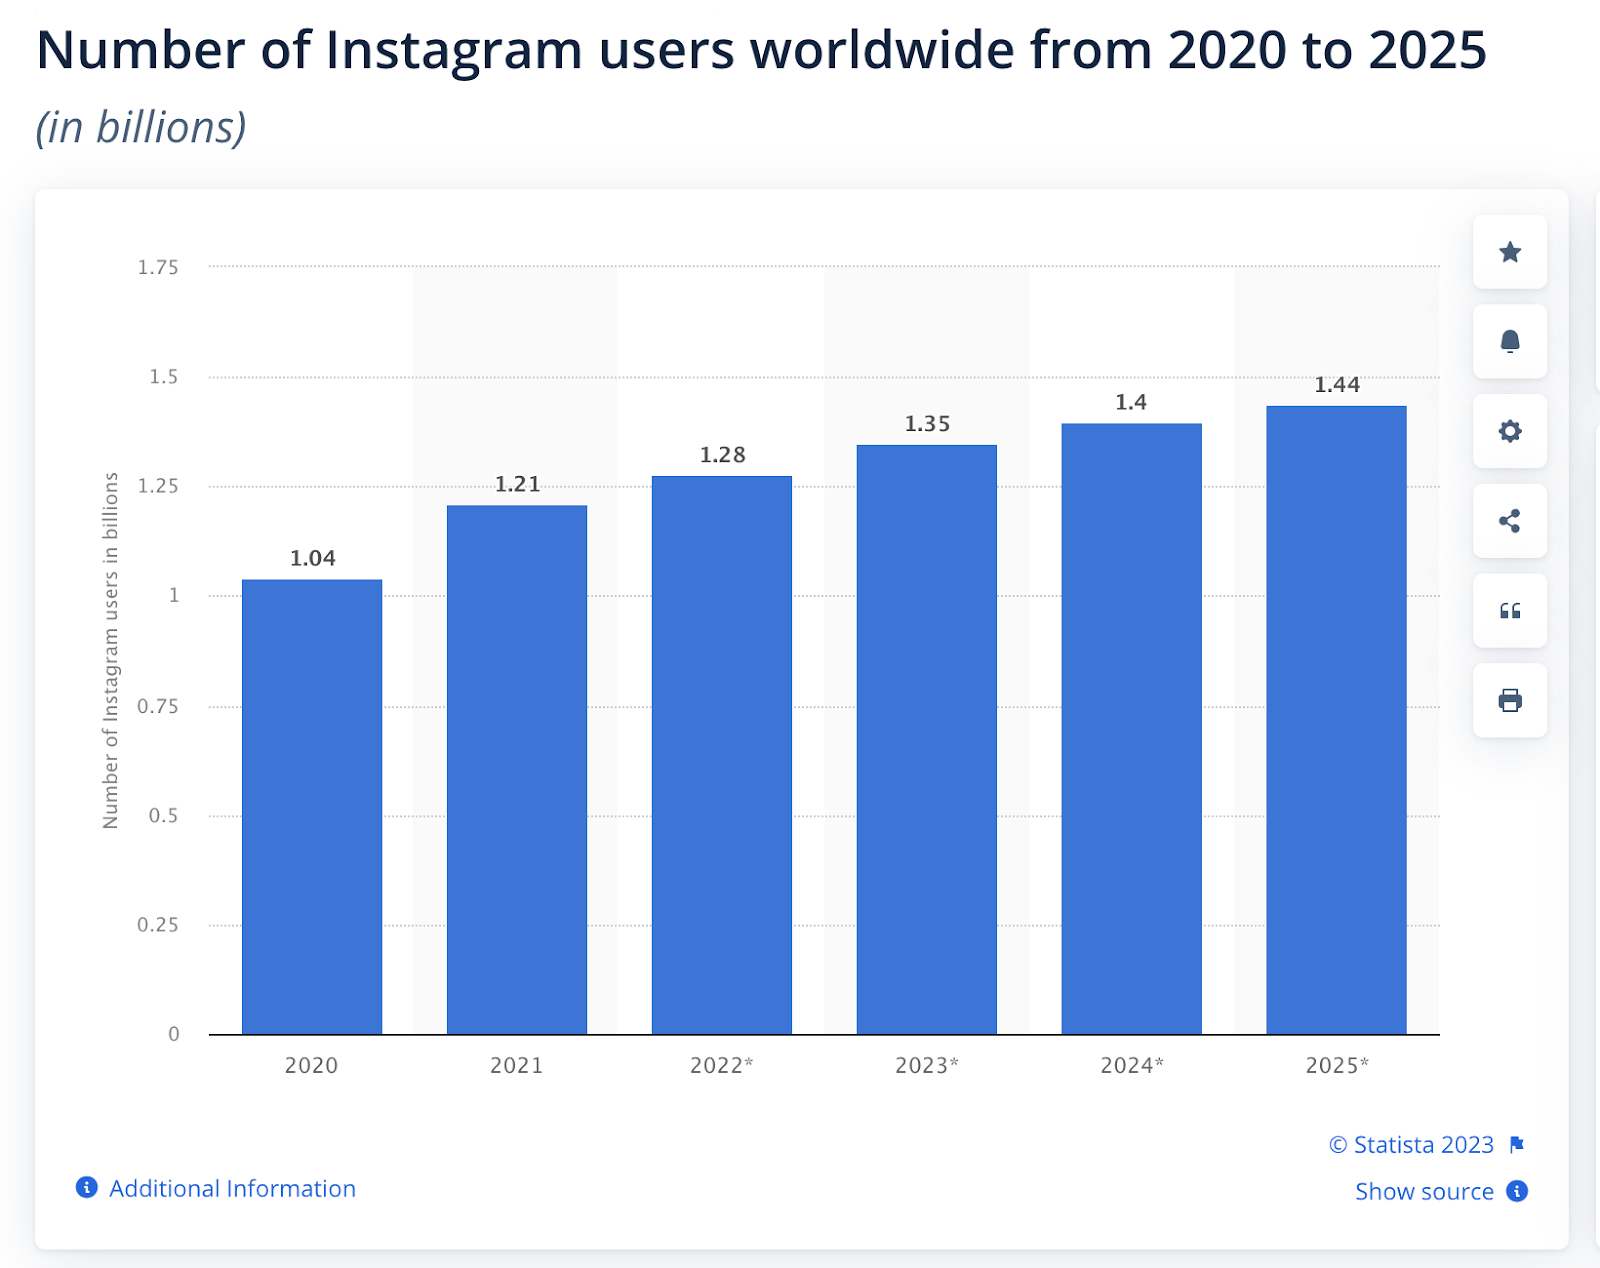 Statistics on the number of Instagram users around the world.